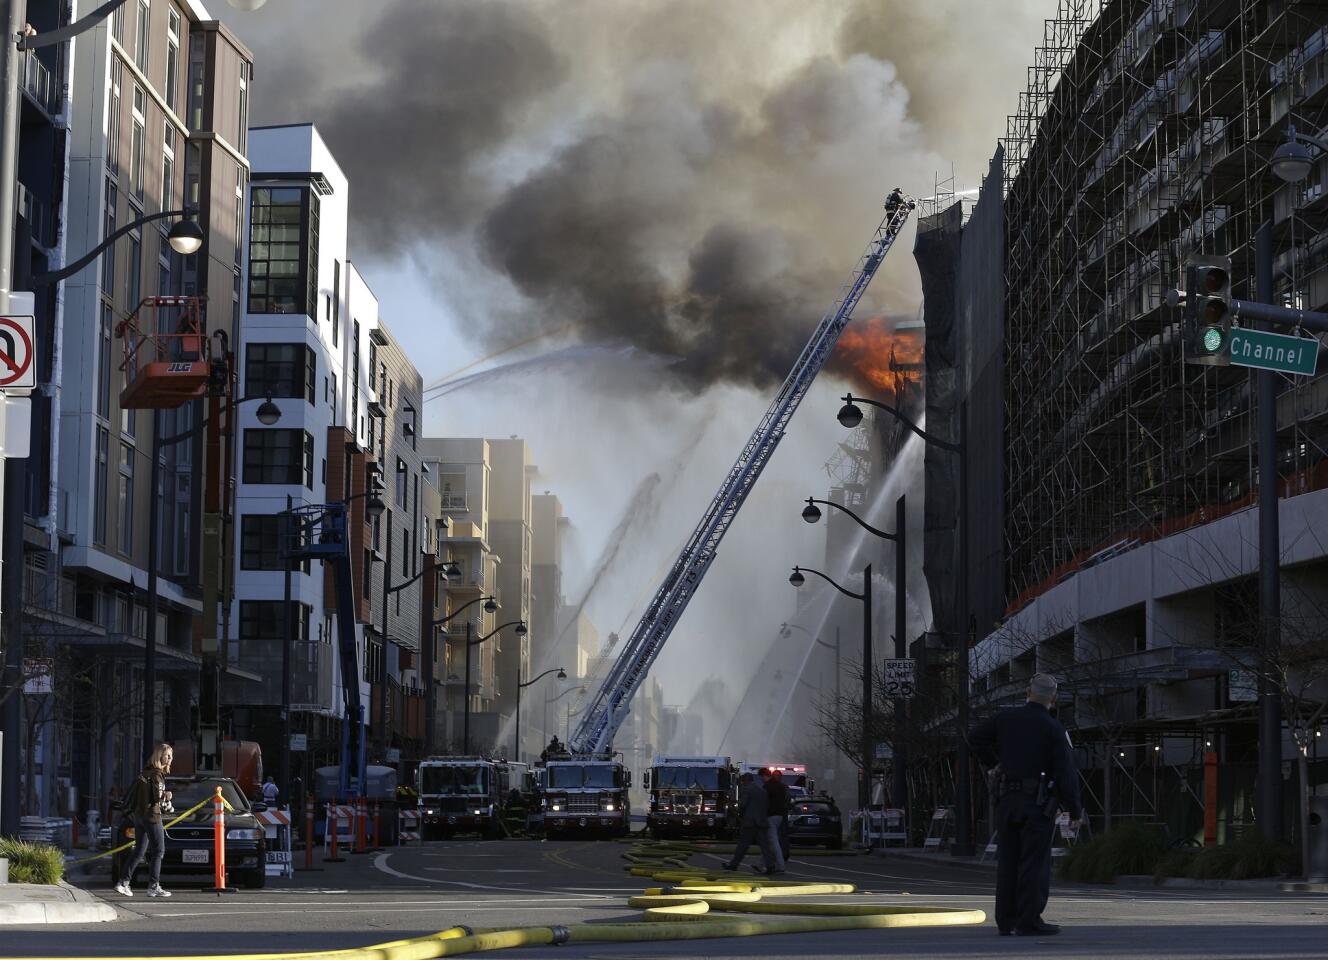 Firefighters battle a fire that began in a condo high-rise under construction in the Mission Bay area of San Francisco near At&T Park. One firefighter was injured, authorities said.